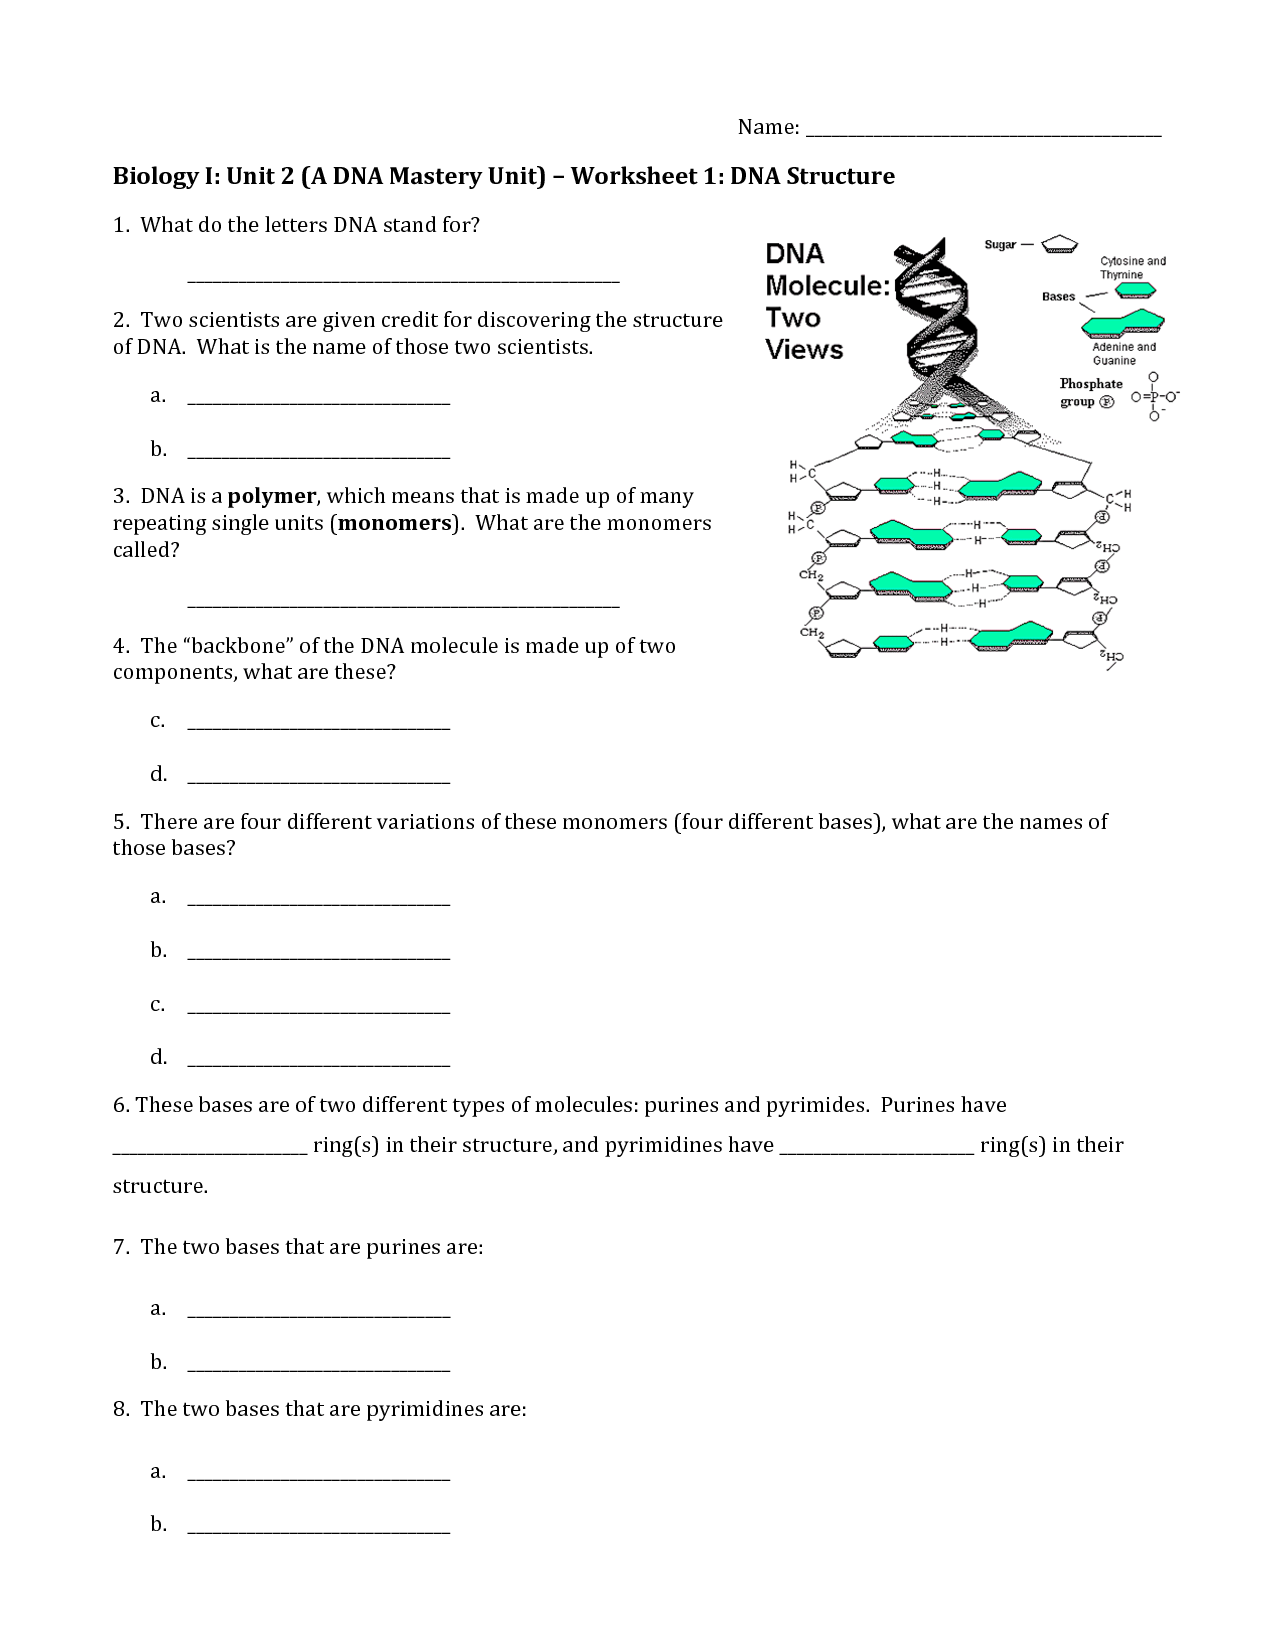 DNA Structure Worksheet Answers Image